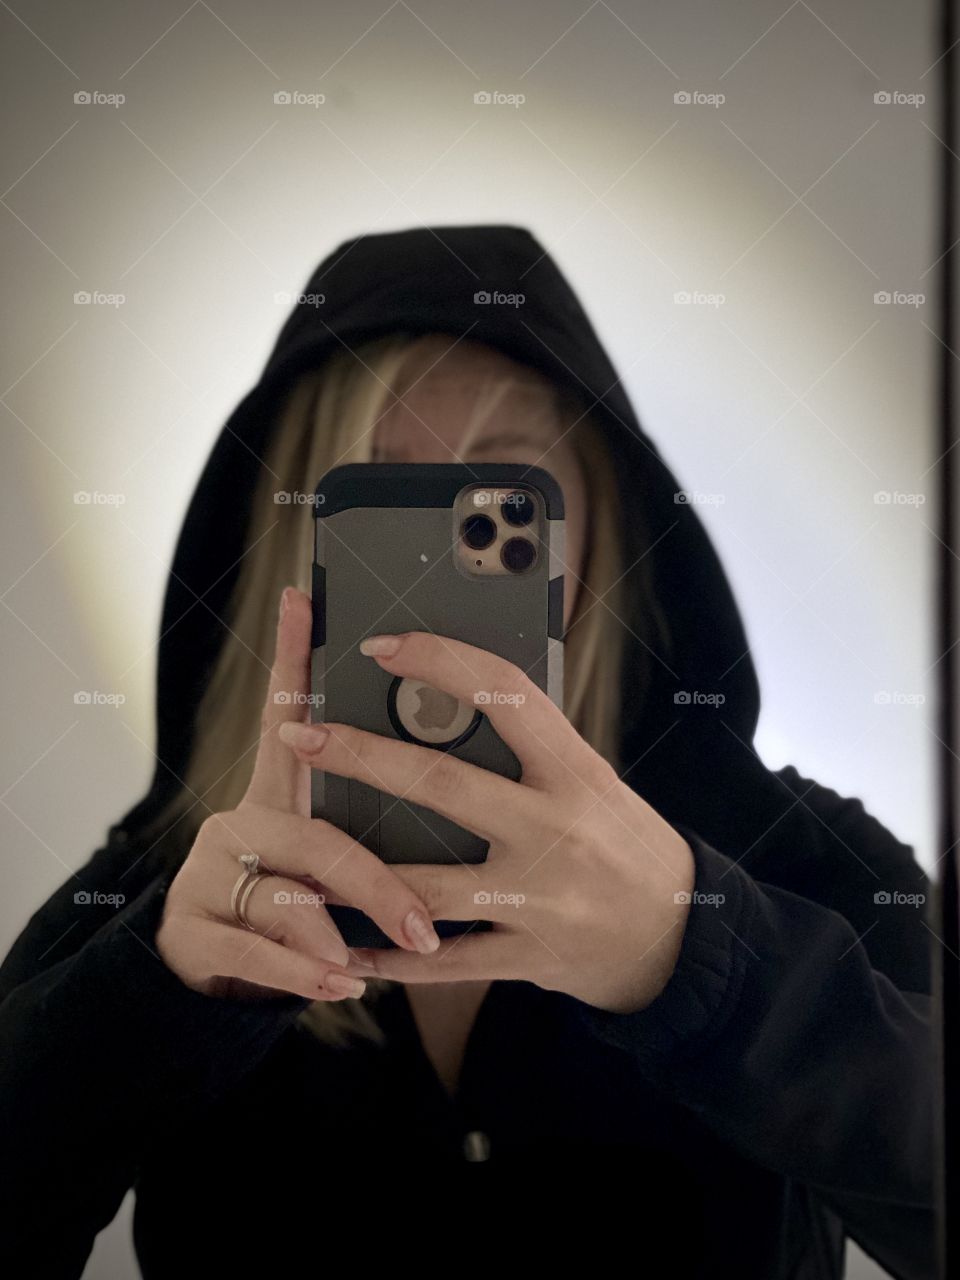 Iphone 11 pro max Selfie in a bathroom, backlight, woman in a black jacket 